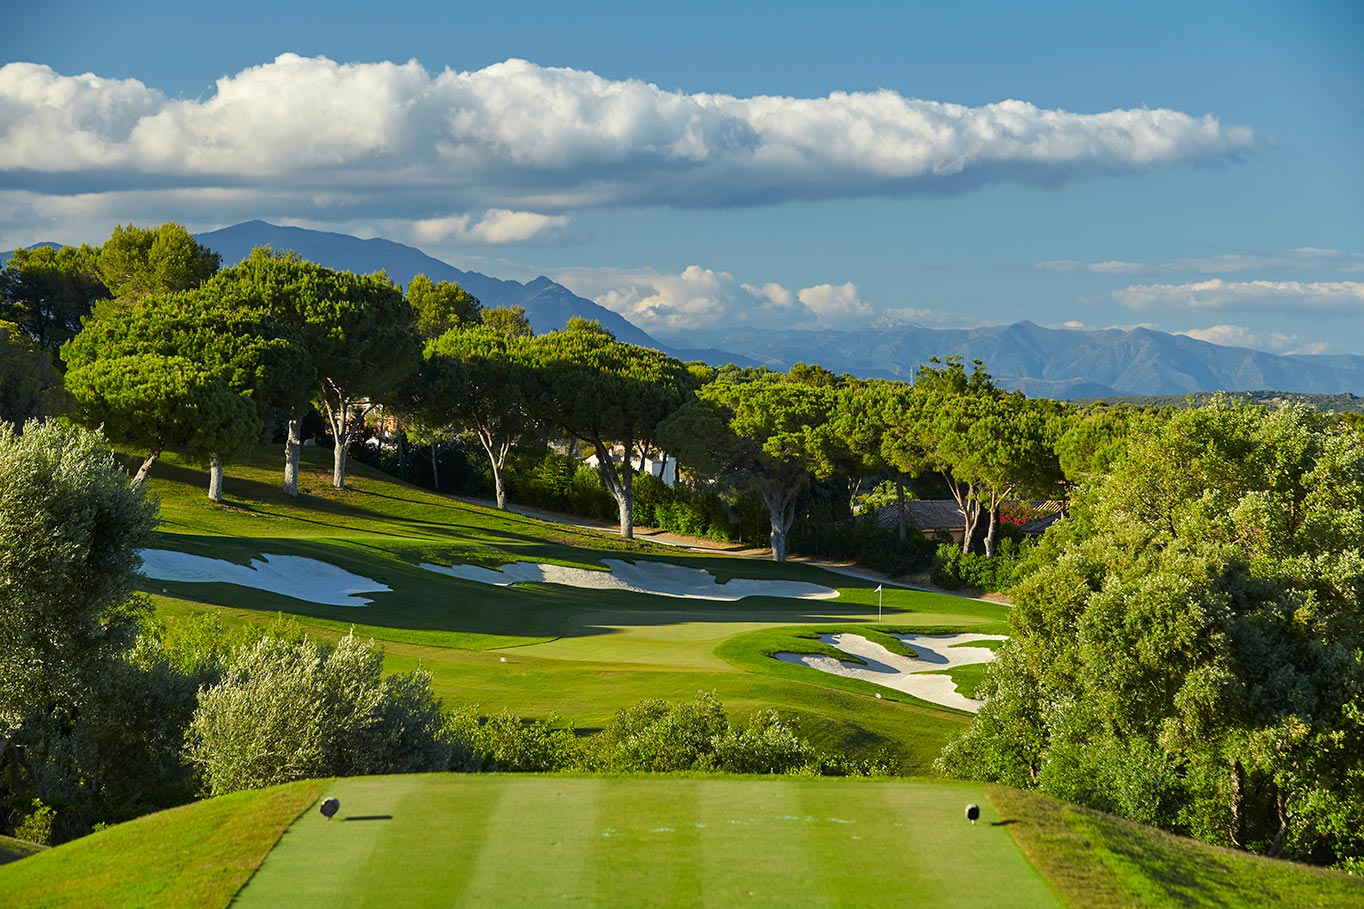 <strong>REAL CLUB VALDERRAMA</strong>, Spain. This is the crown jewel of European golf courses.<br><br>Waldek says: “The course has hosted a number of tournaments, including the 1997 Ryder Cup, and club membership is highly exclusive, but Valderrama can still be played by visitors nonetheless. Valderrama received royal status in 2014 from the Spanish monarchy.”